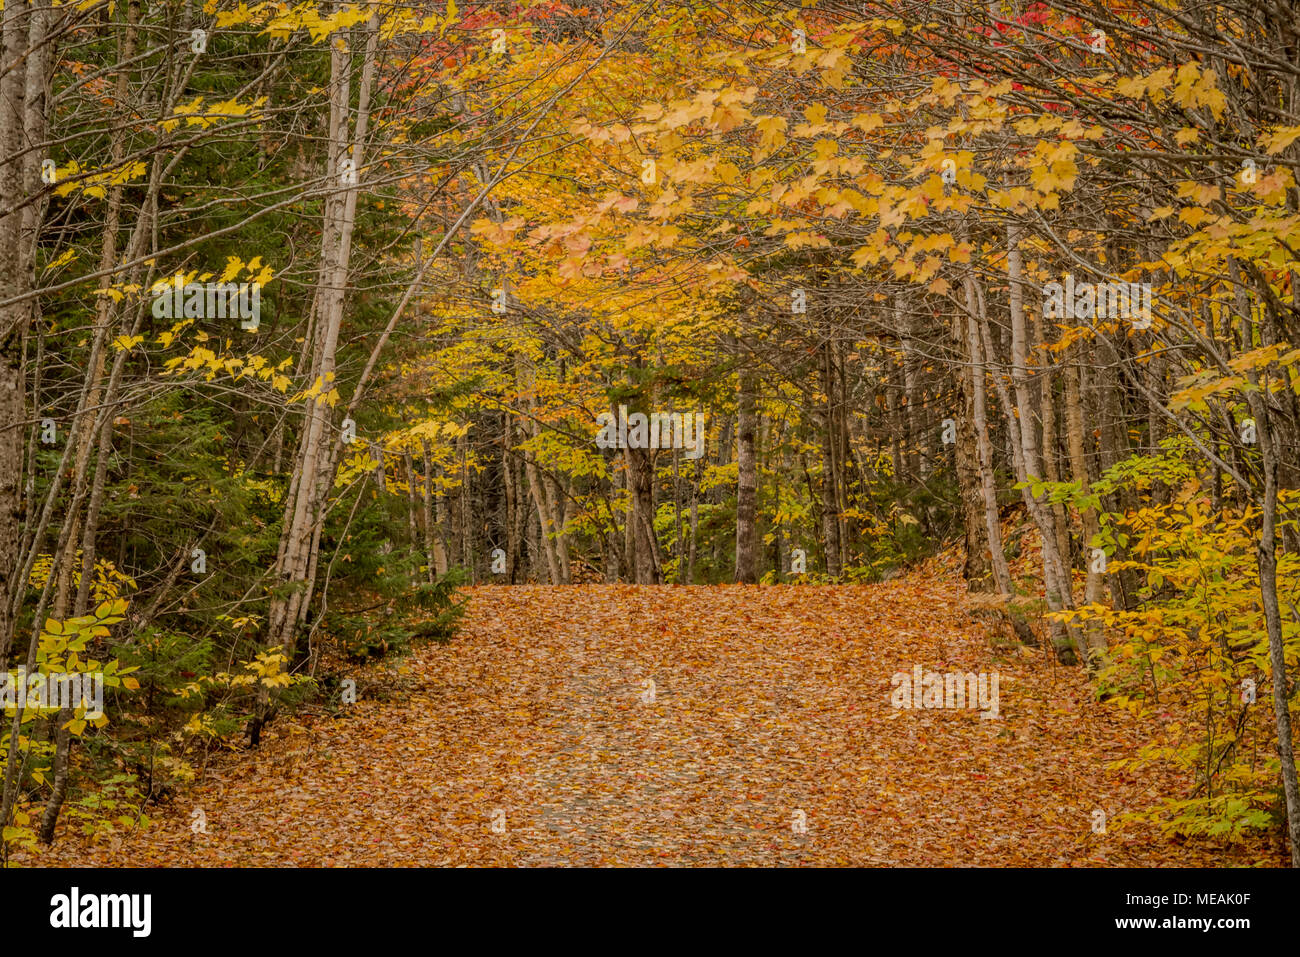 Leaves Cover Narrow Road Through Forest in Autumn Leaf Peeping Season Stock Photo